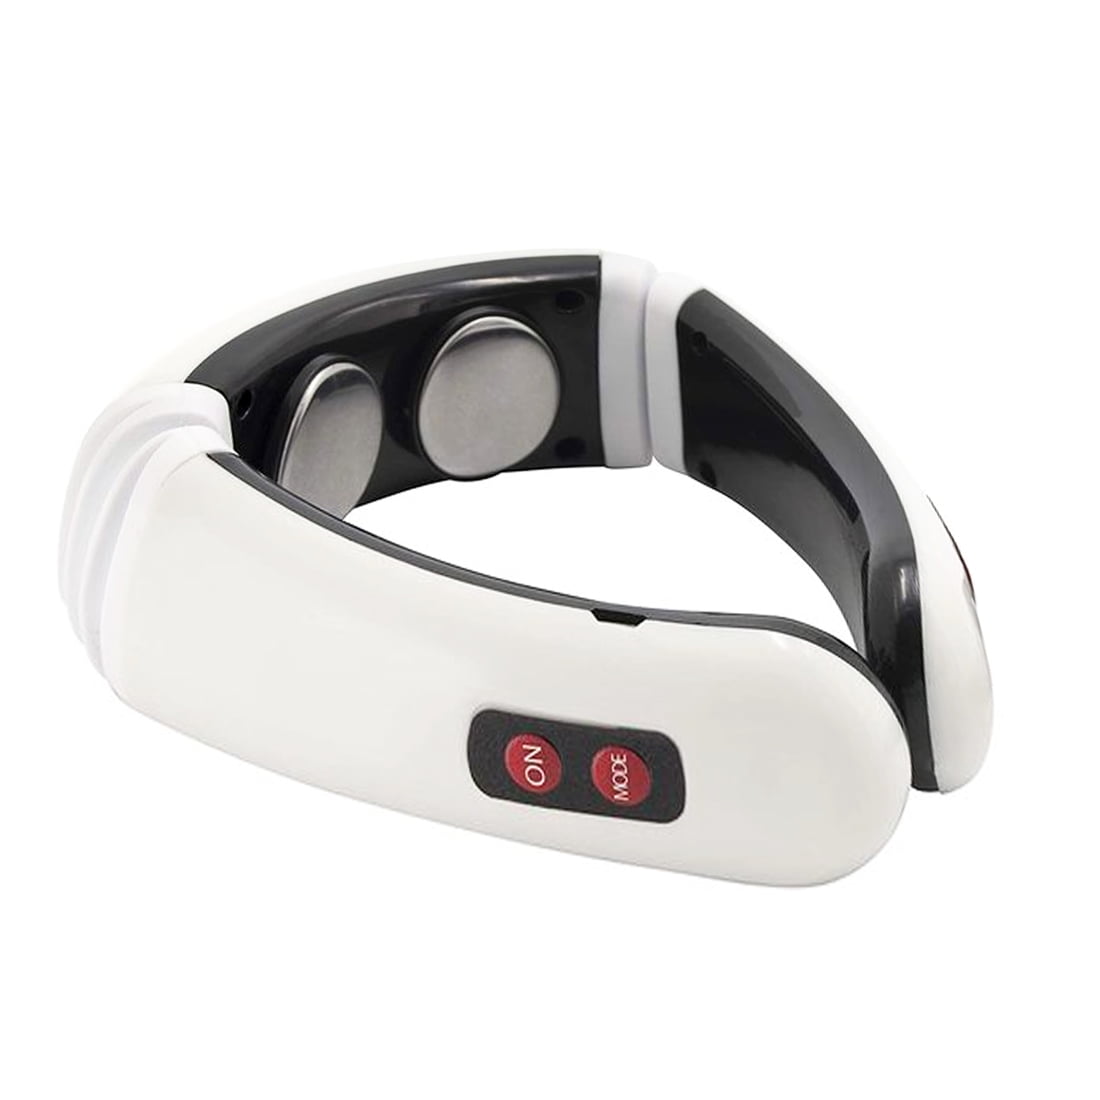 Great wellness deal: $40 wearable neck massager with TENS and heat tech